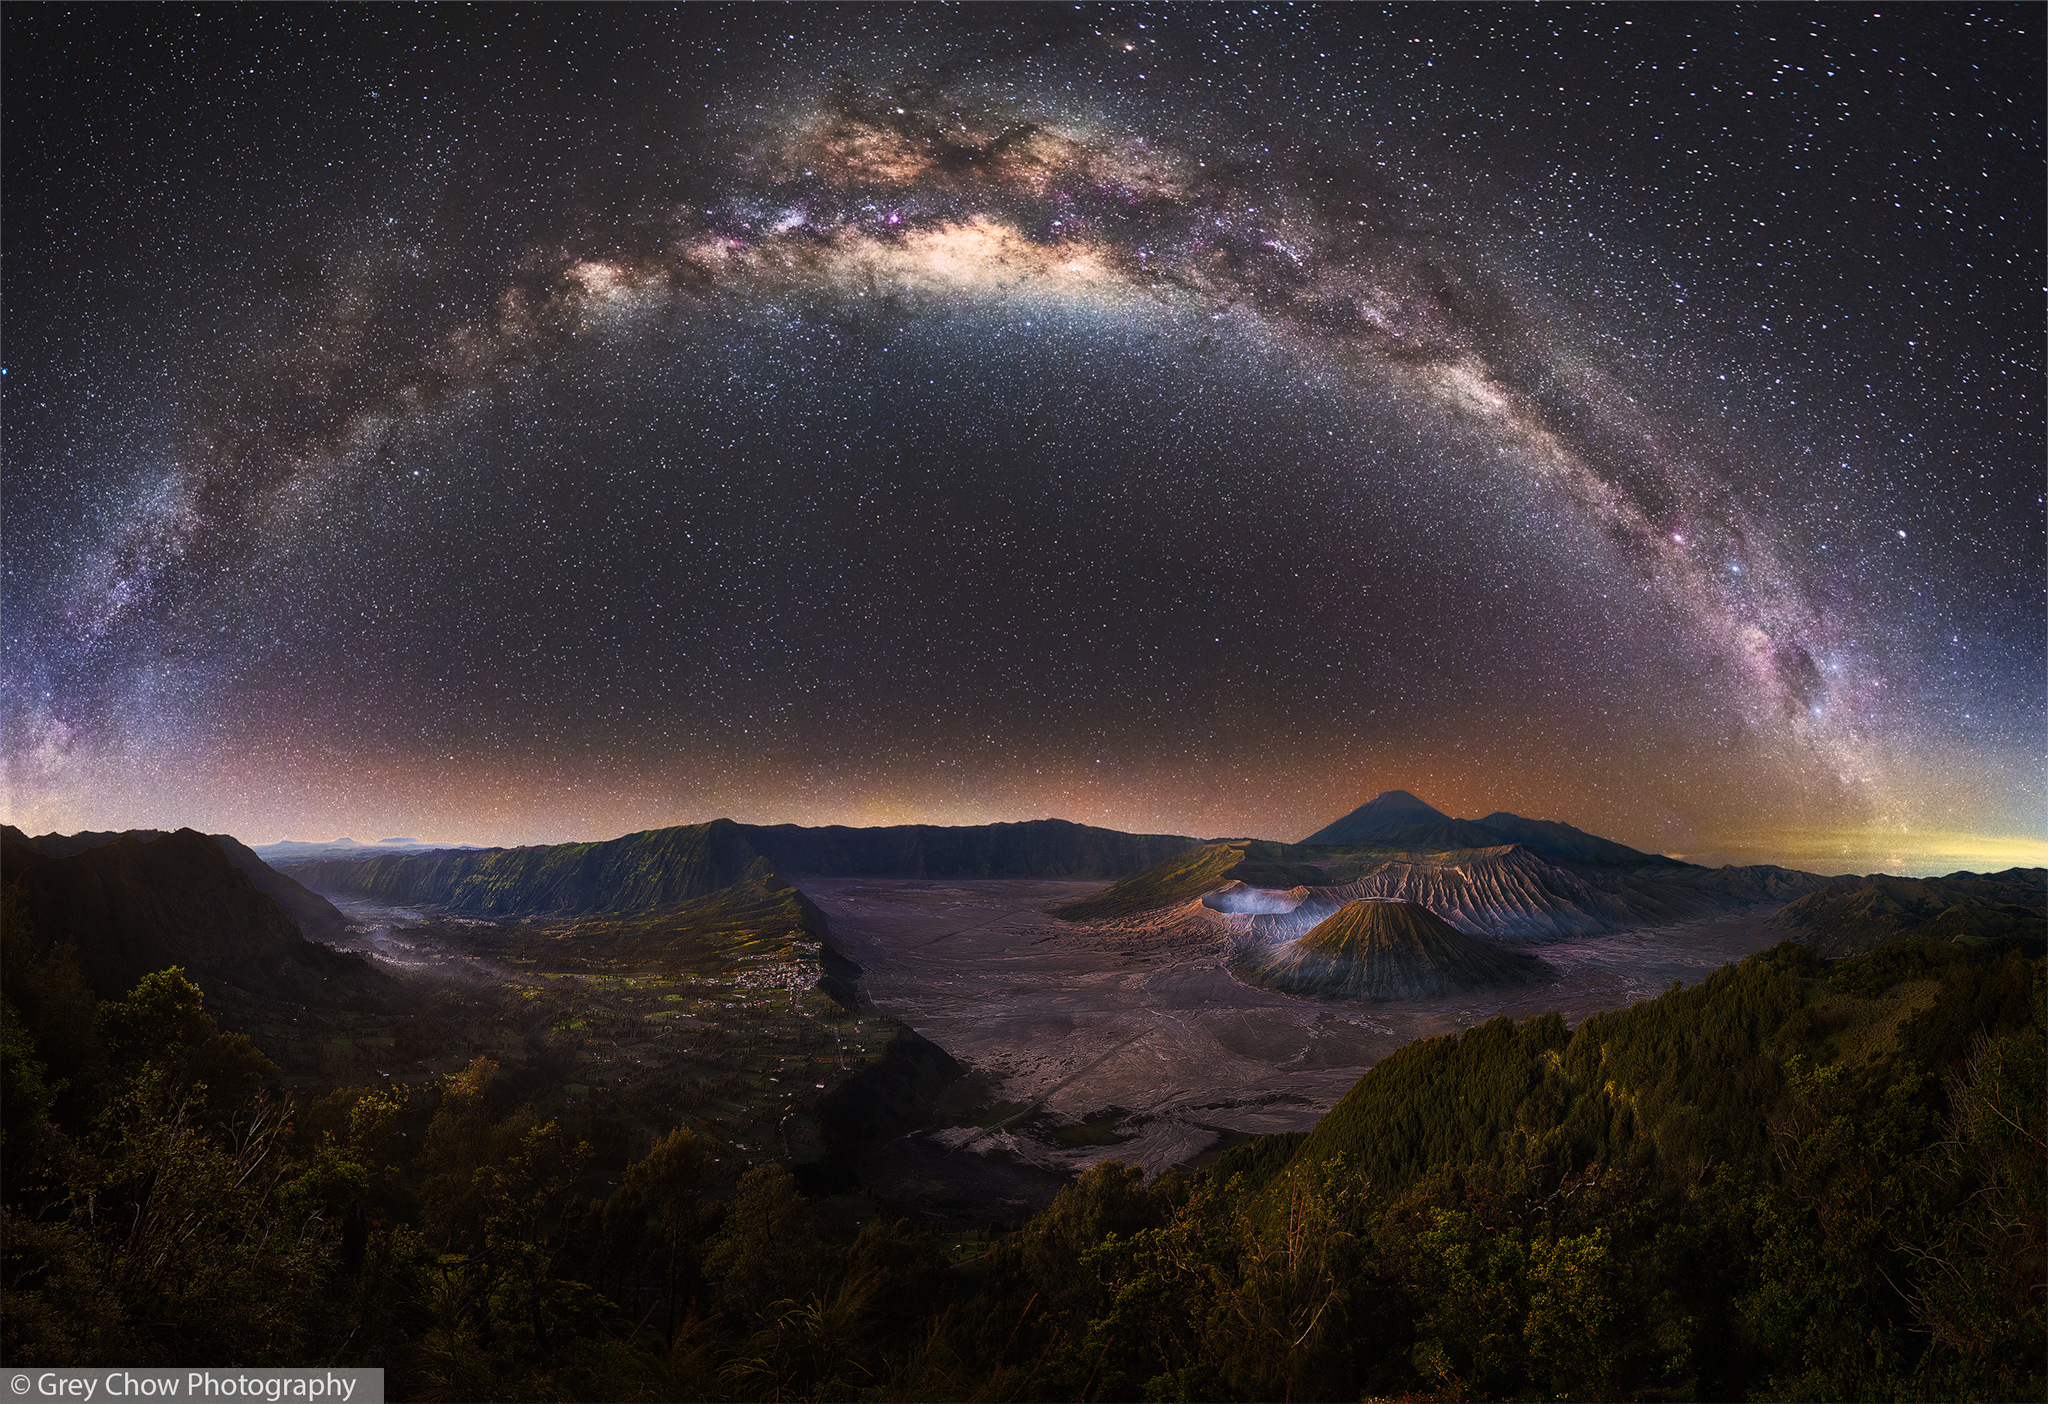 A magnificent view of Bromo Milky Way during night time